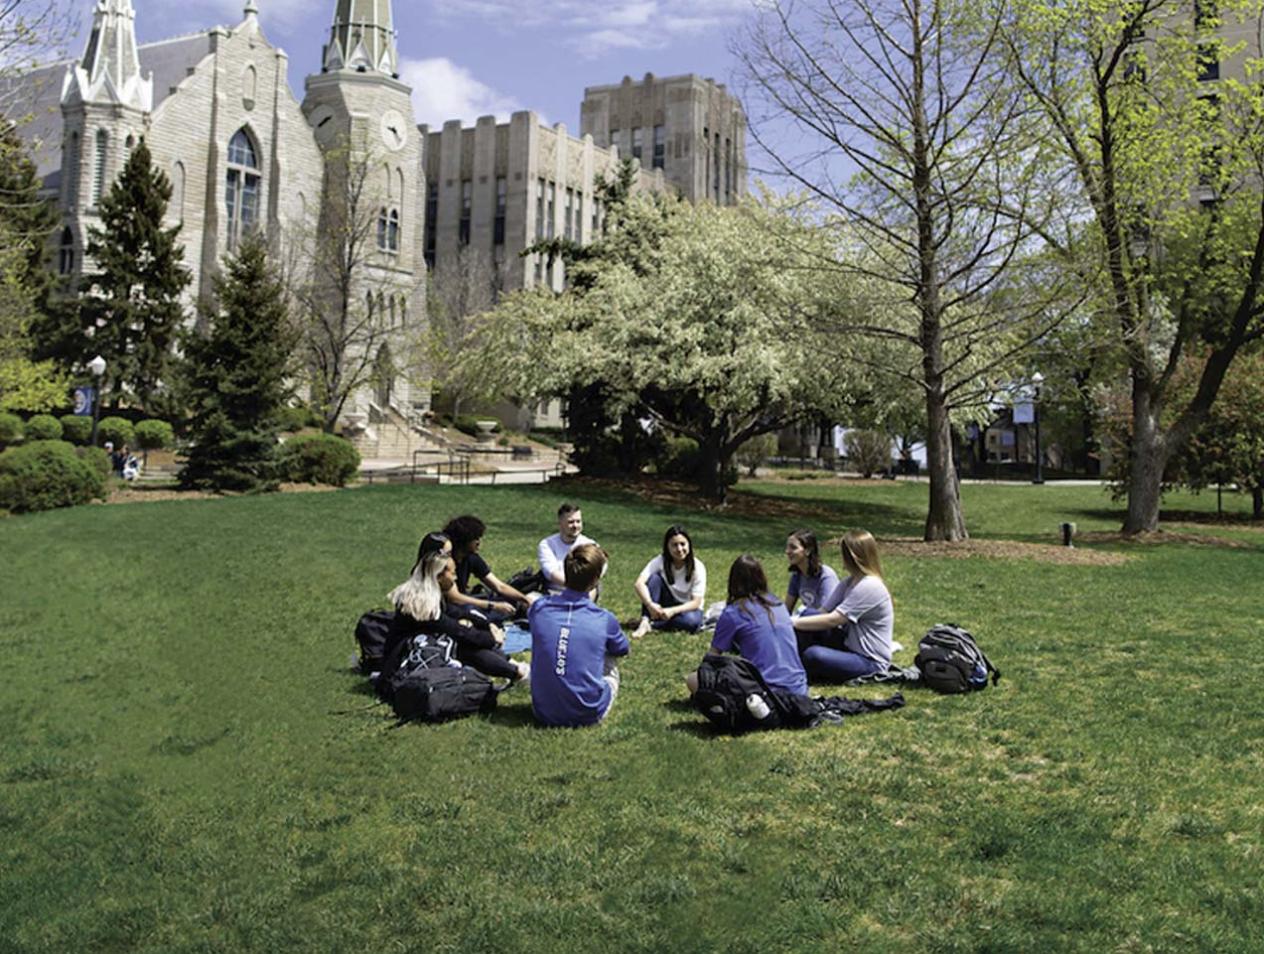 Students sitting in circle on campus green space.